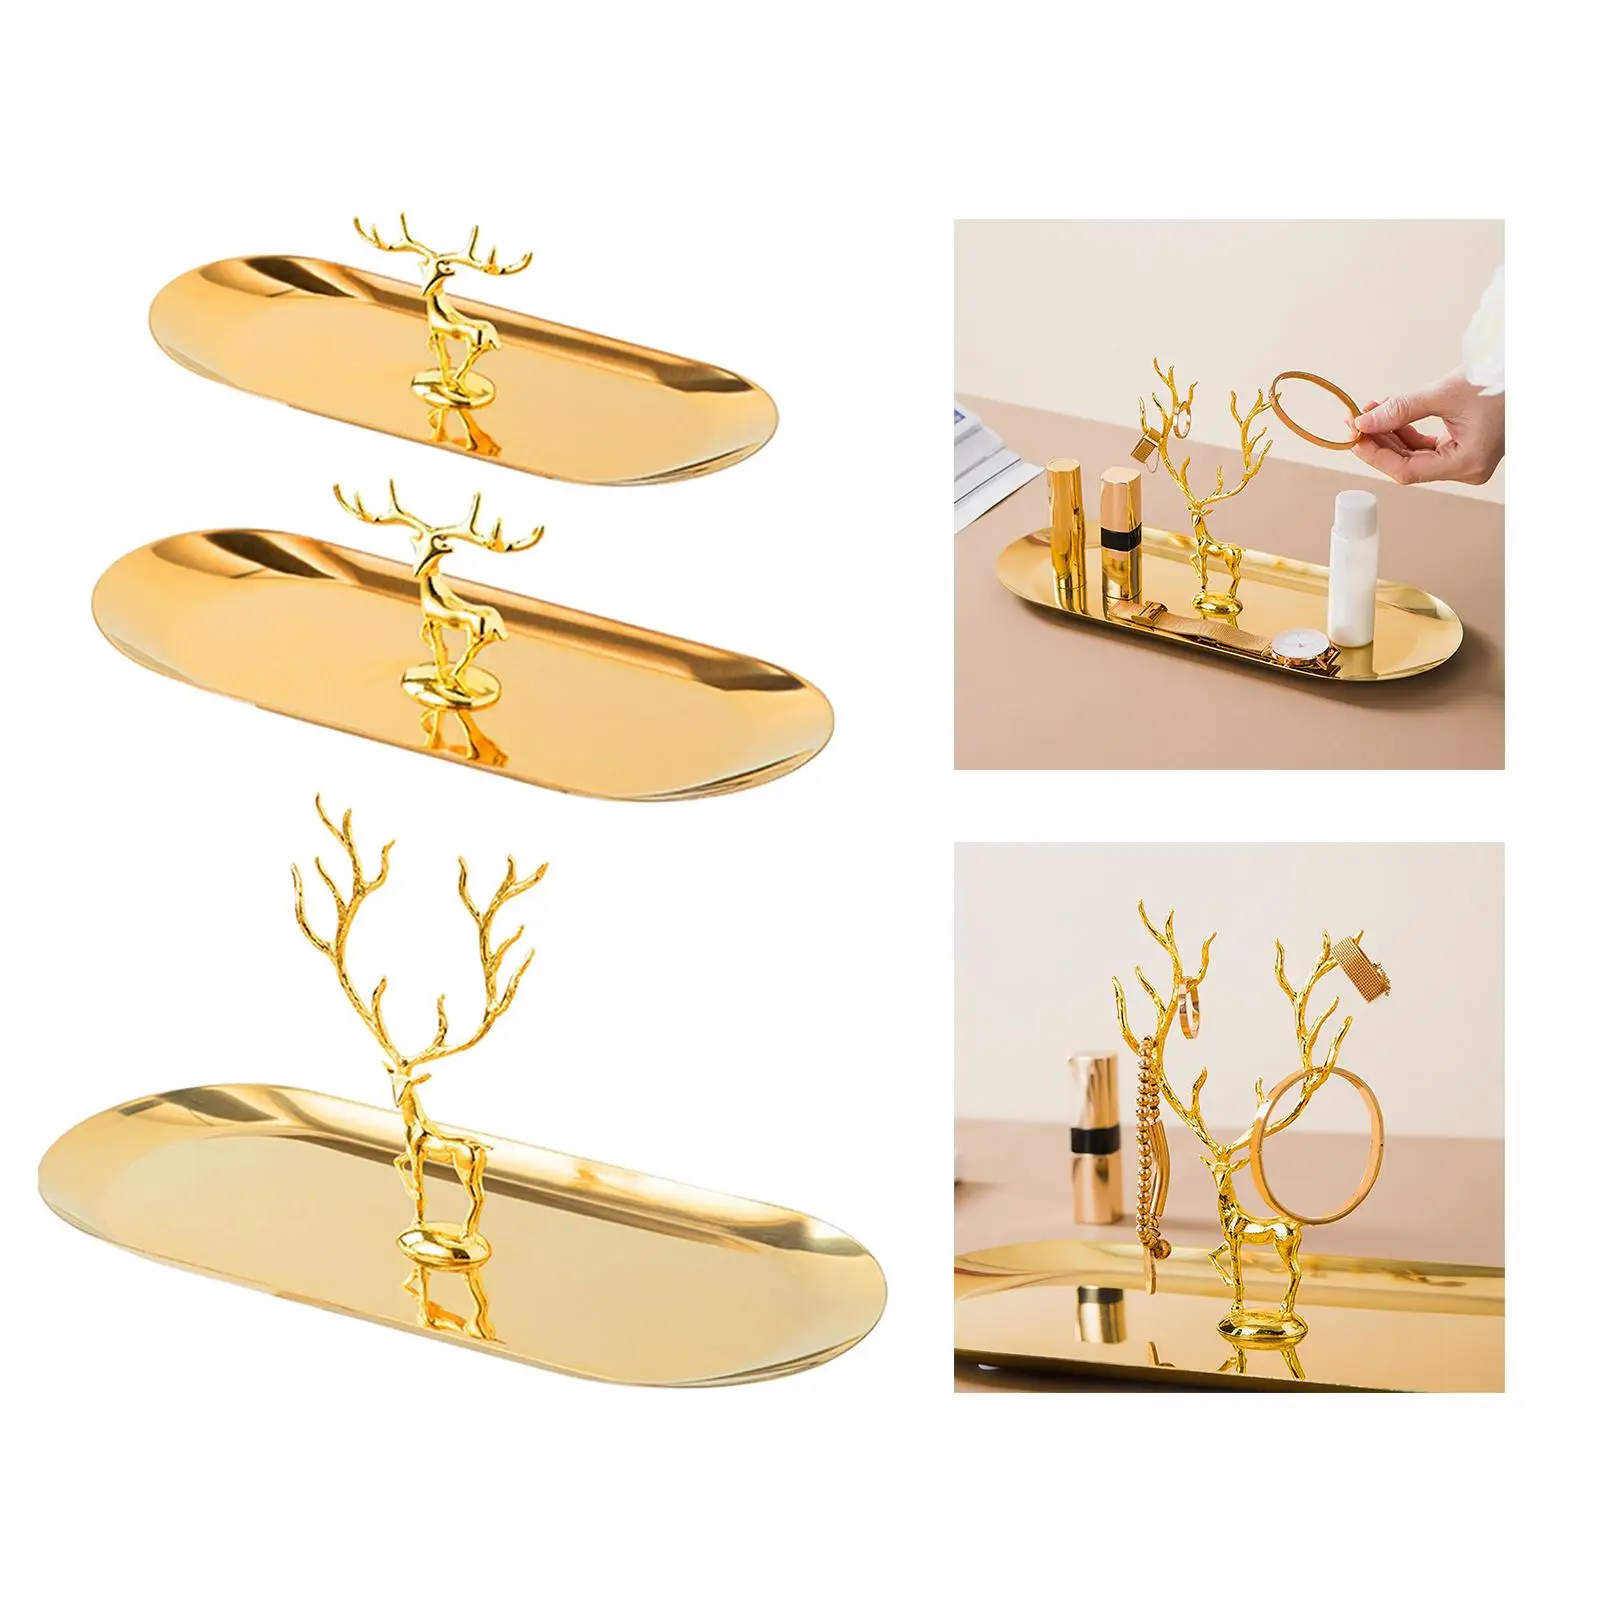 Golden Jewelry Tray Accessory Tray Holder Dish for Necklaces Watches Bathroom